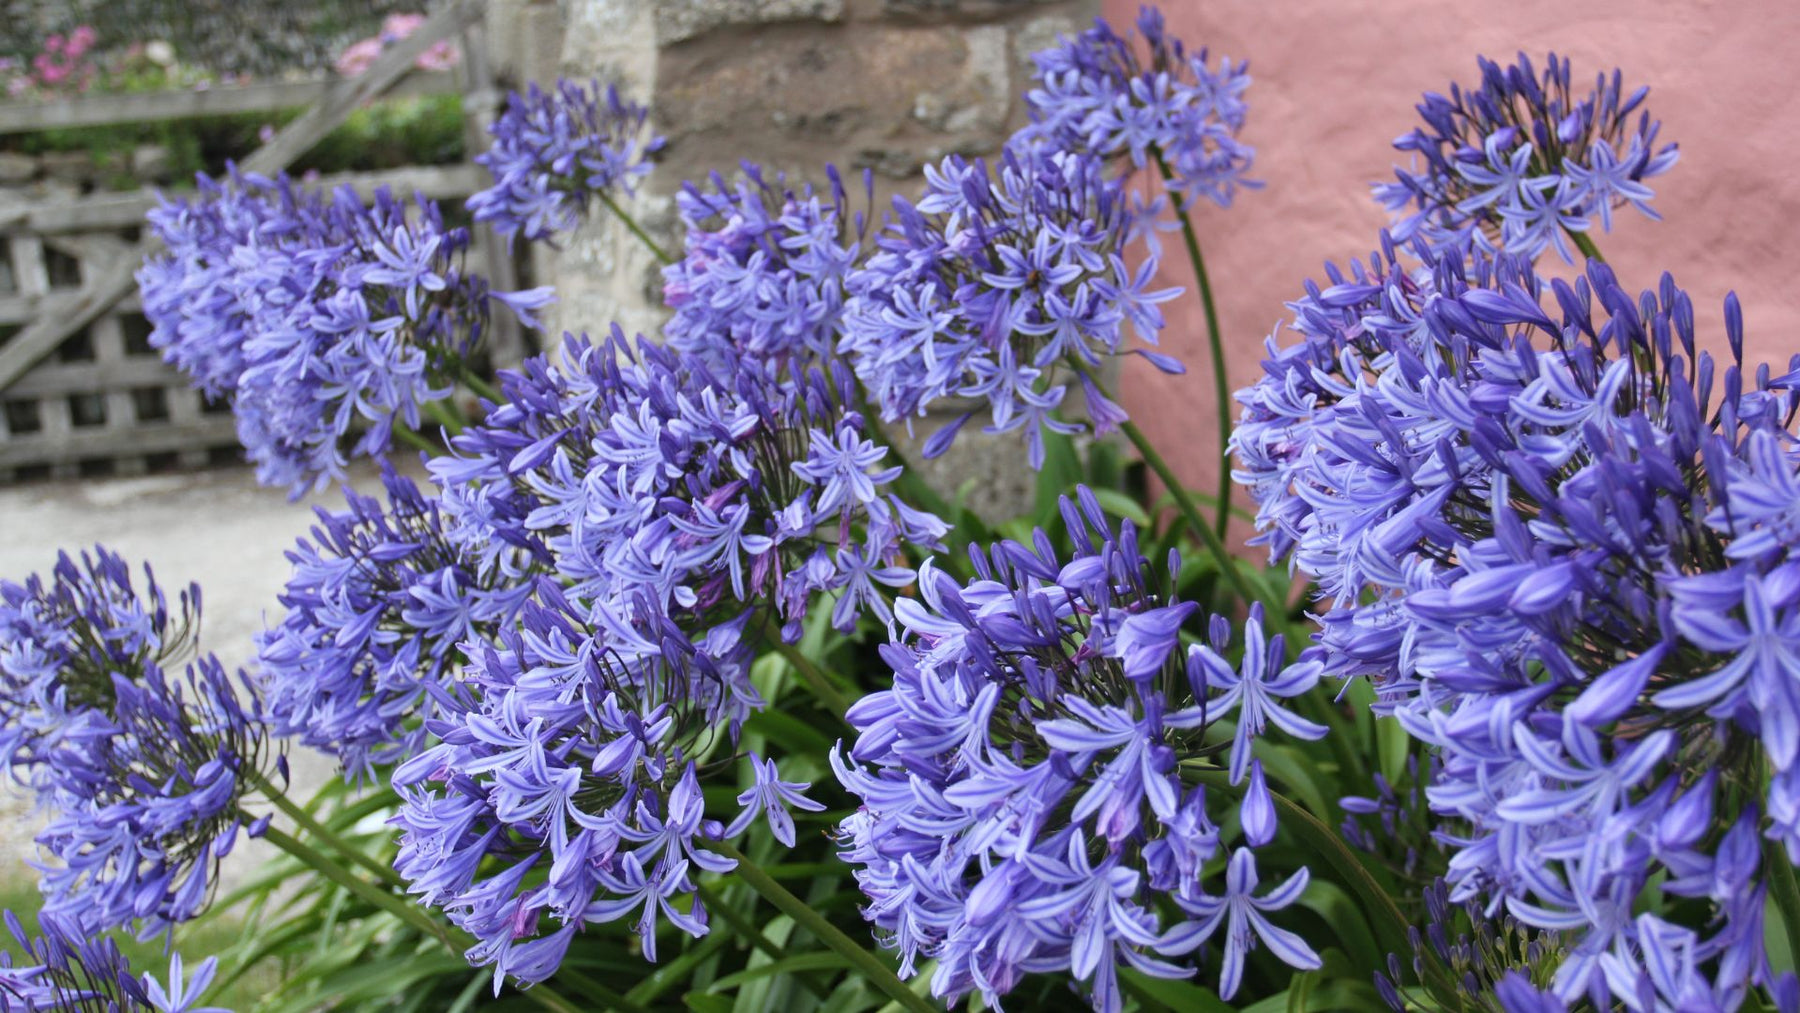 How to grow Agapanthus from a bare root